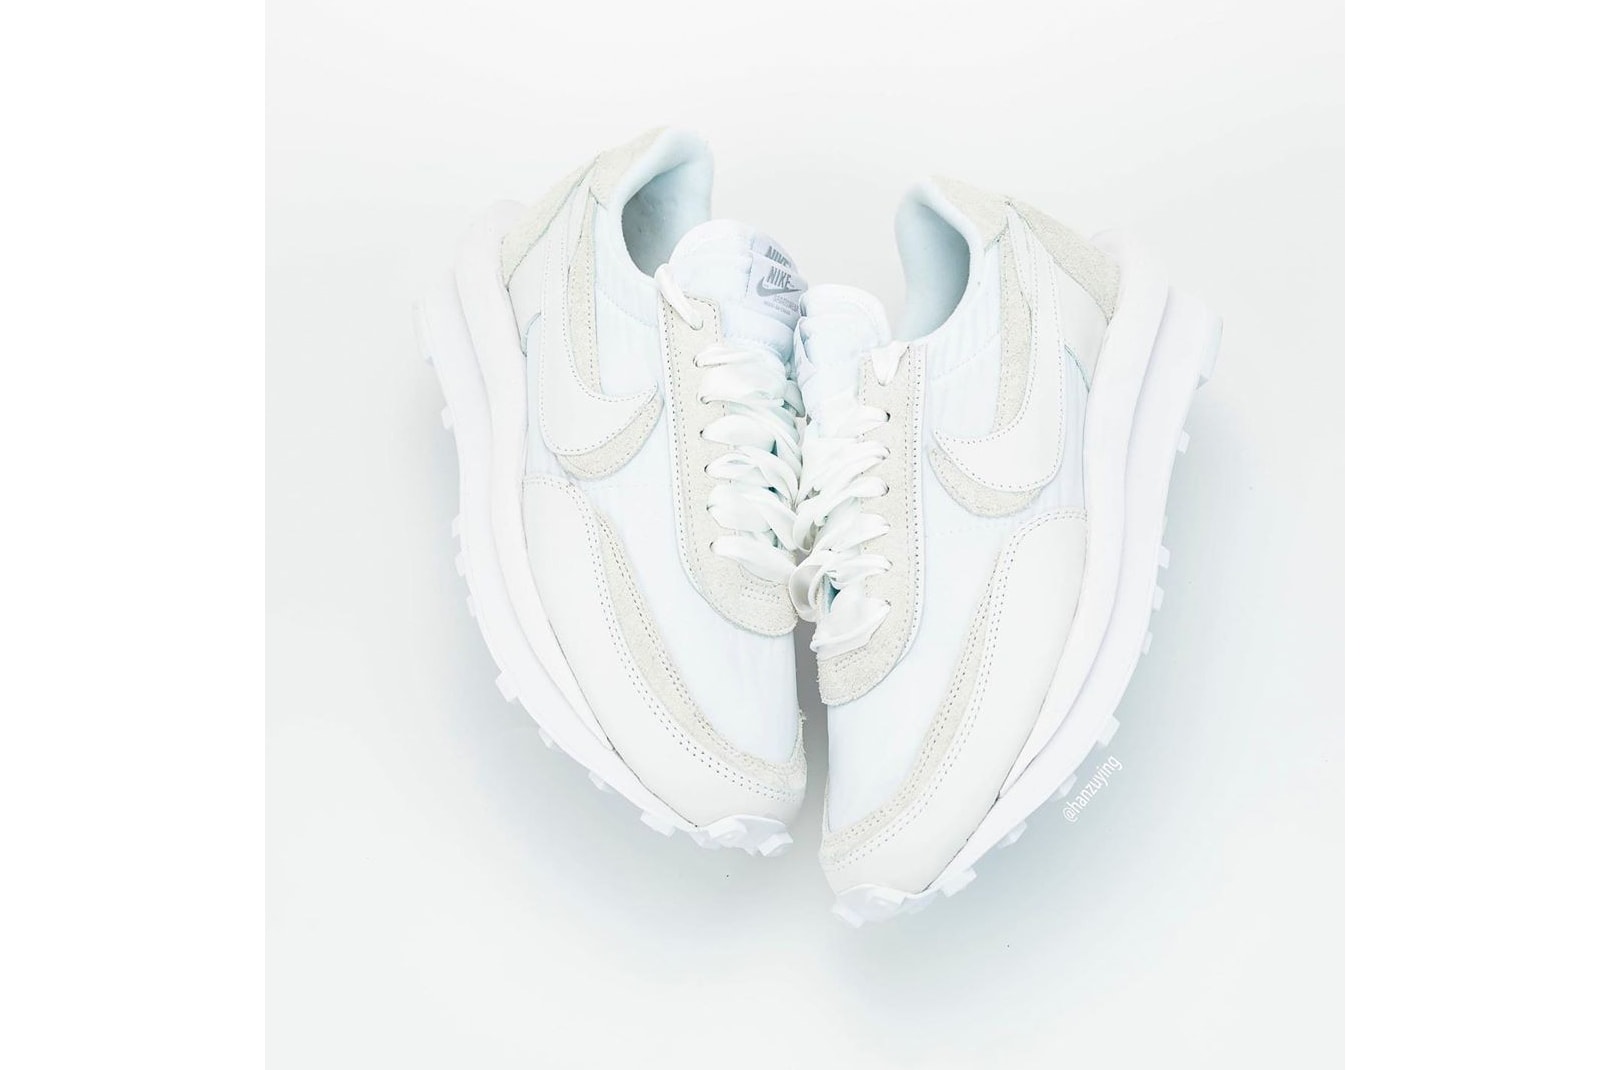 sacai x Nike LDWaffle "White" Better Look sneakers collaborations 